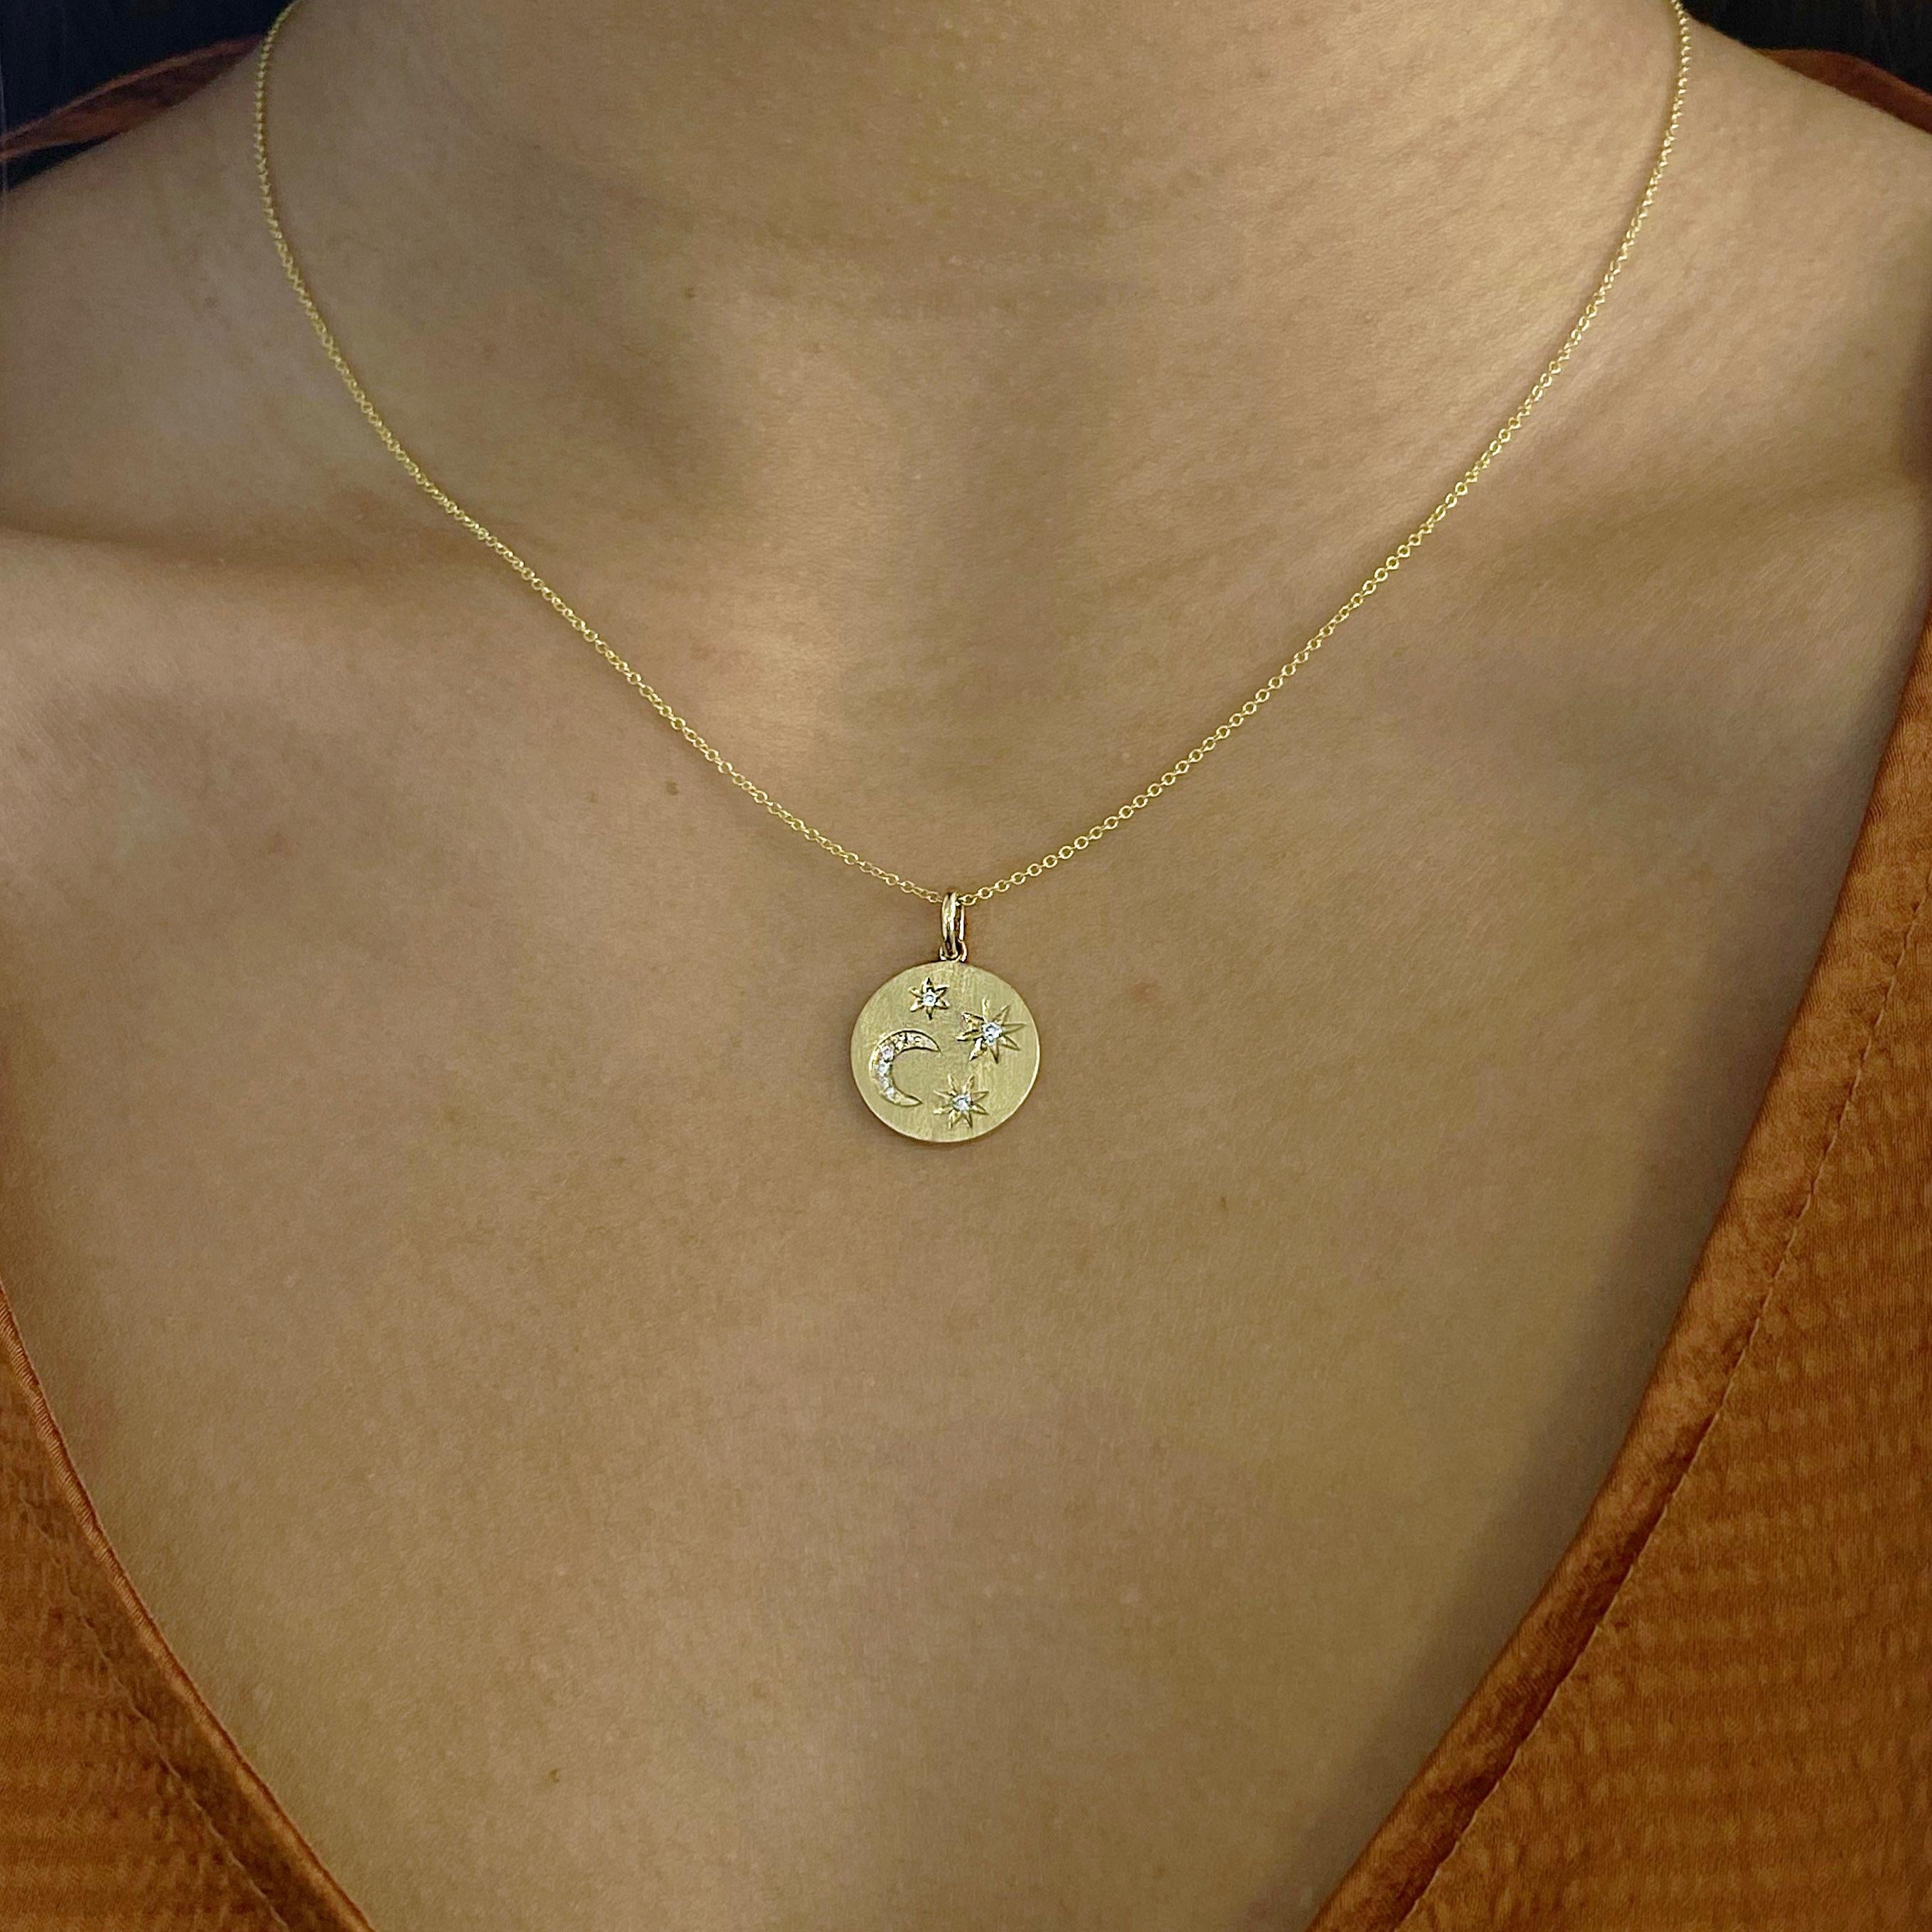 Contemporary Diamond Constellation Necklace, Satin Finish, Moon And Star Disk Pendant 9 Dia For Sale